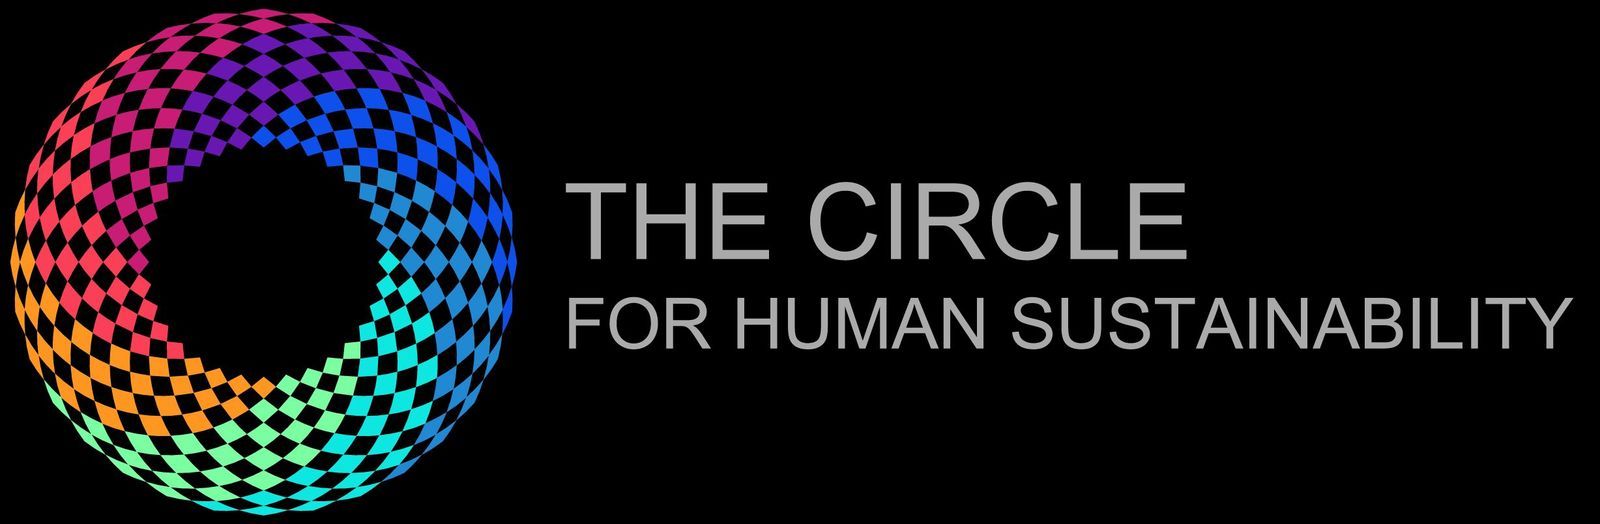 The Circle for Human Sustainability